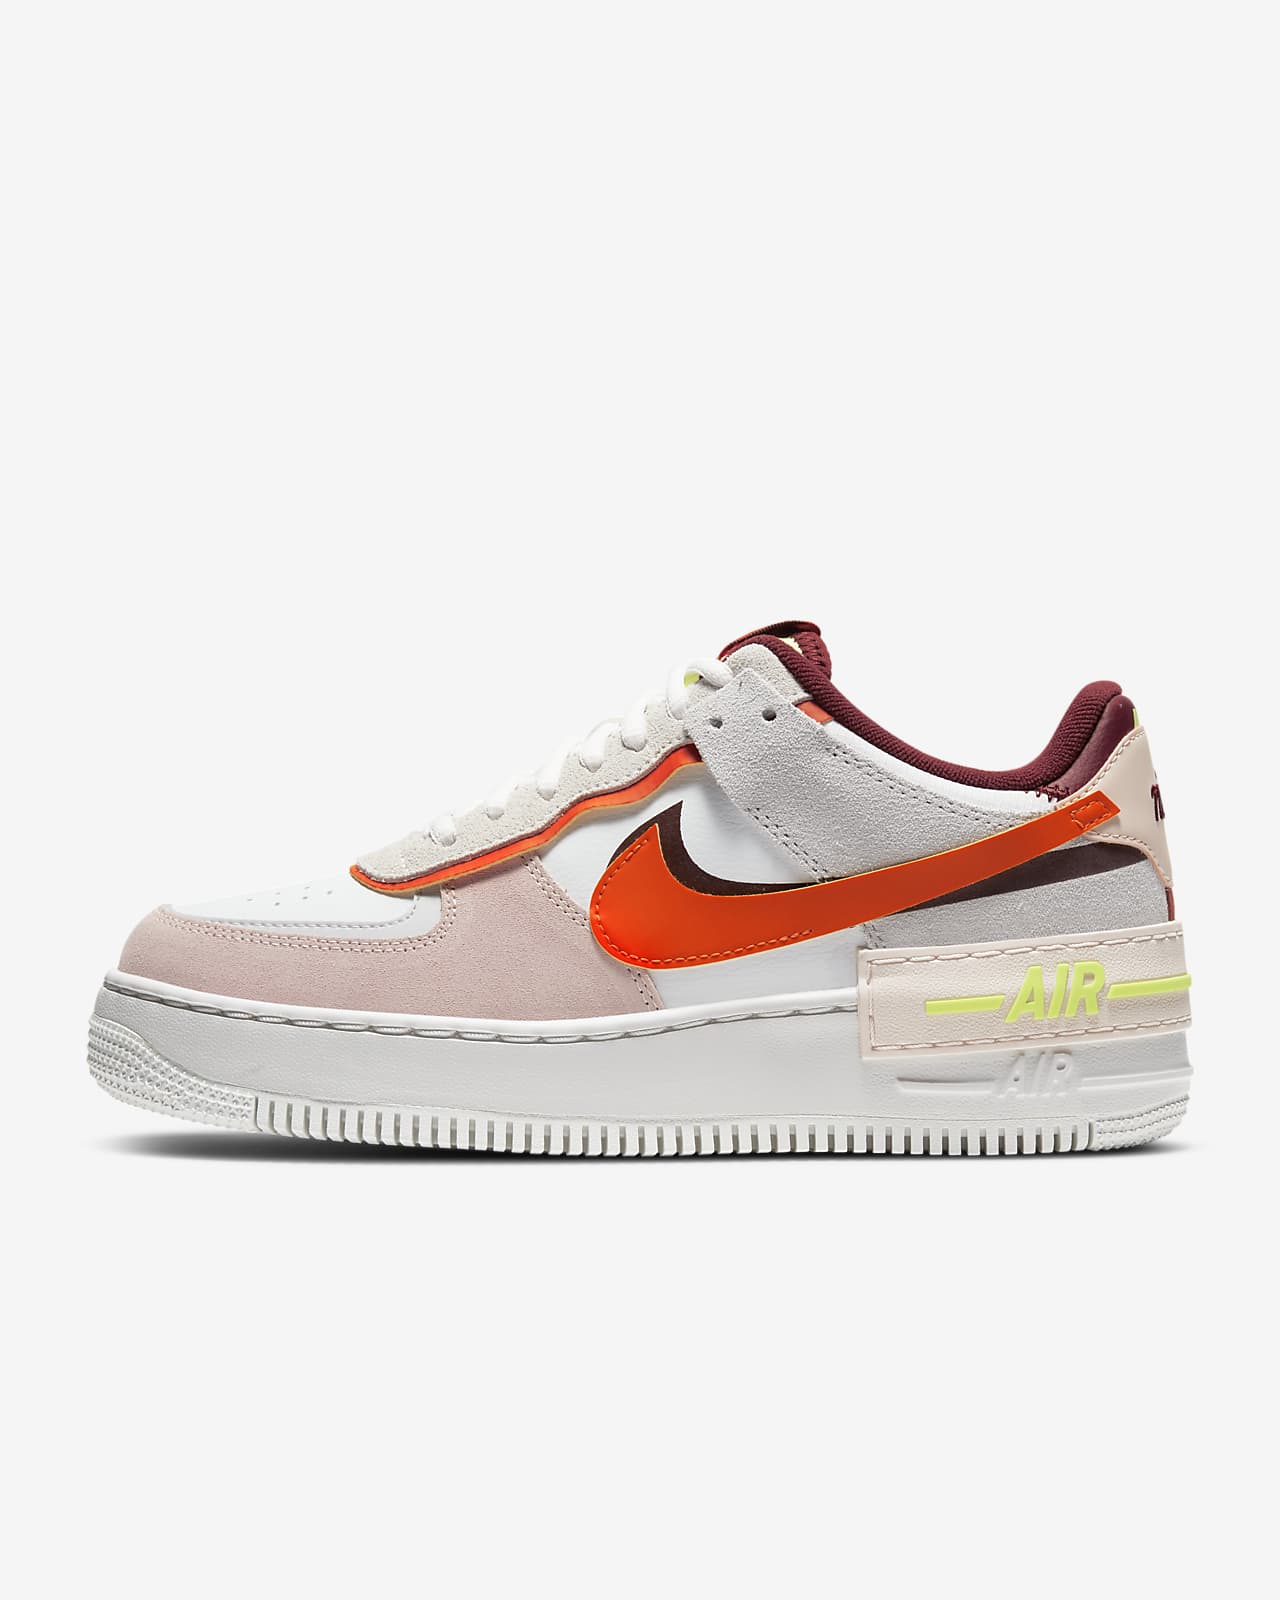 nike air force 1 low fluo,www.consultarct.com.br